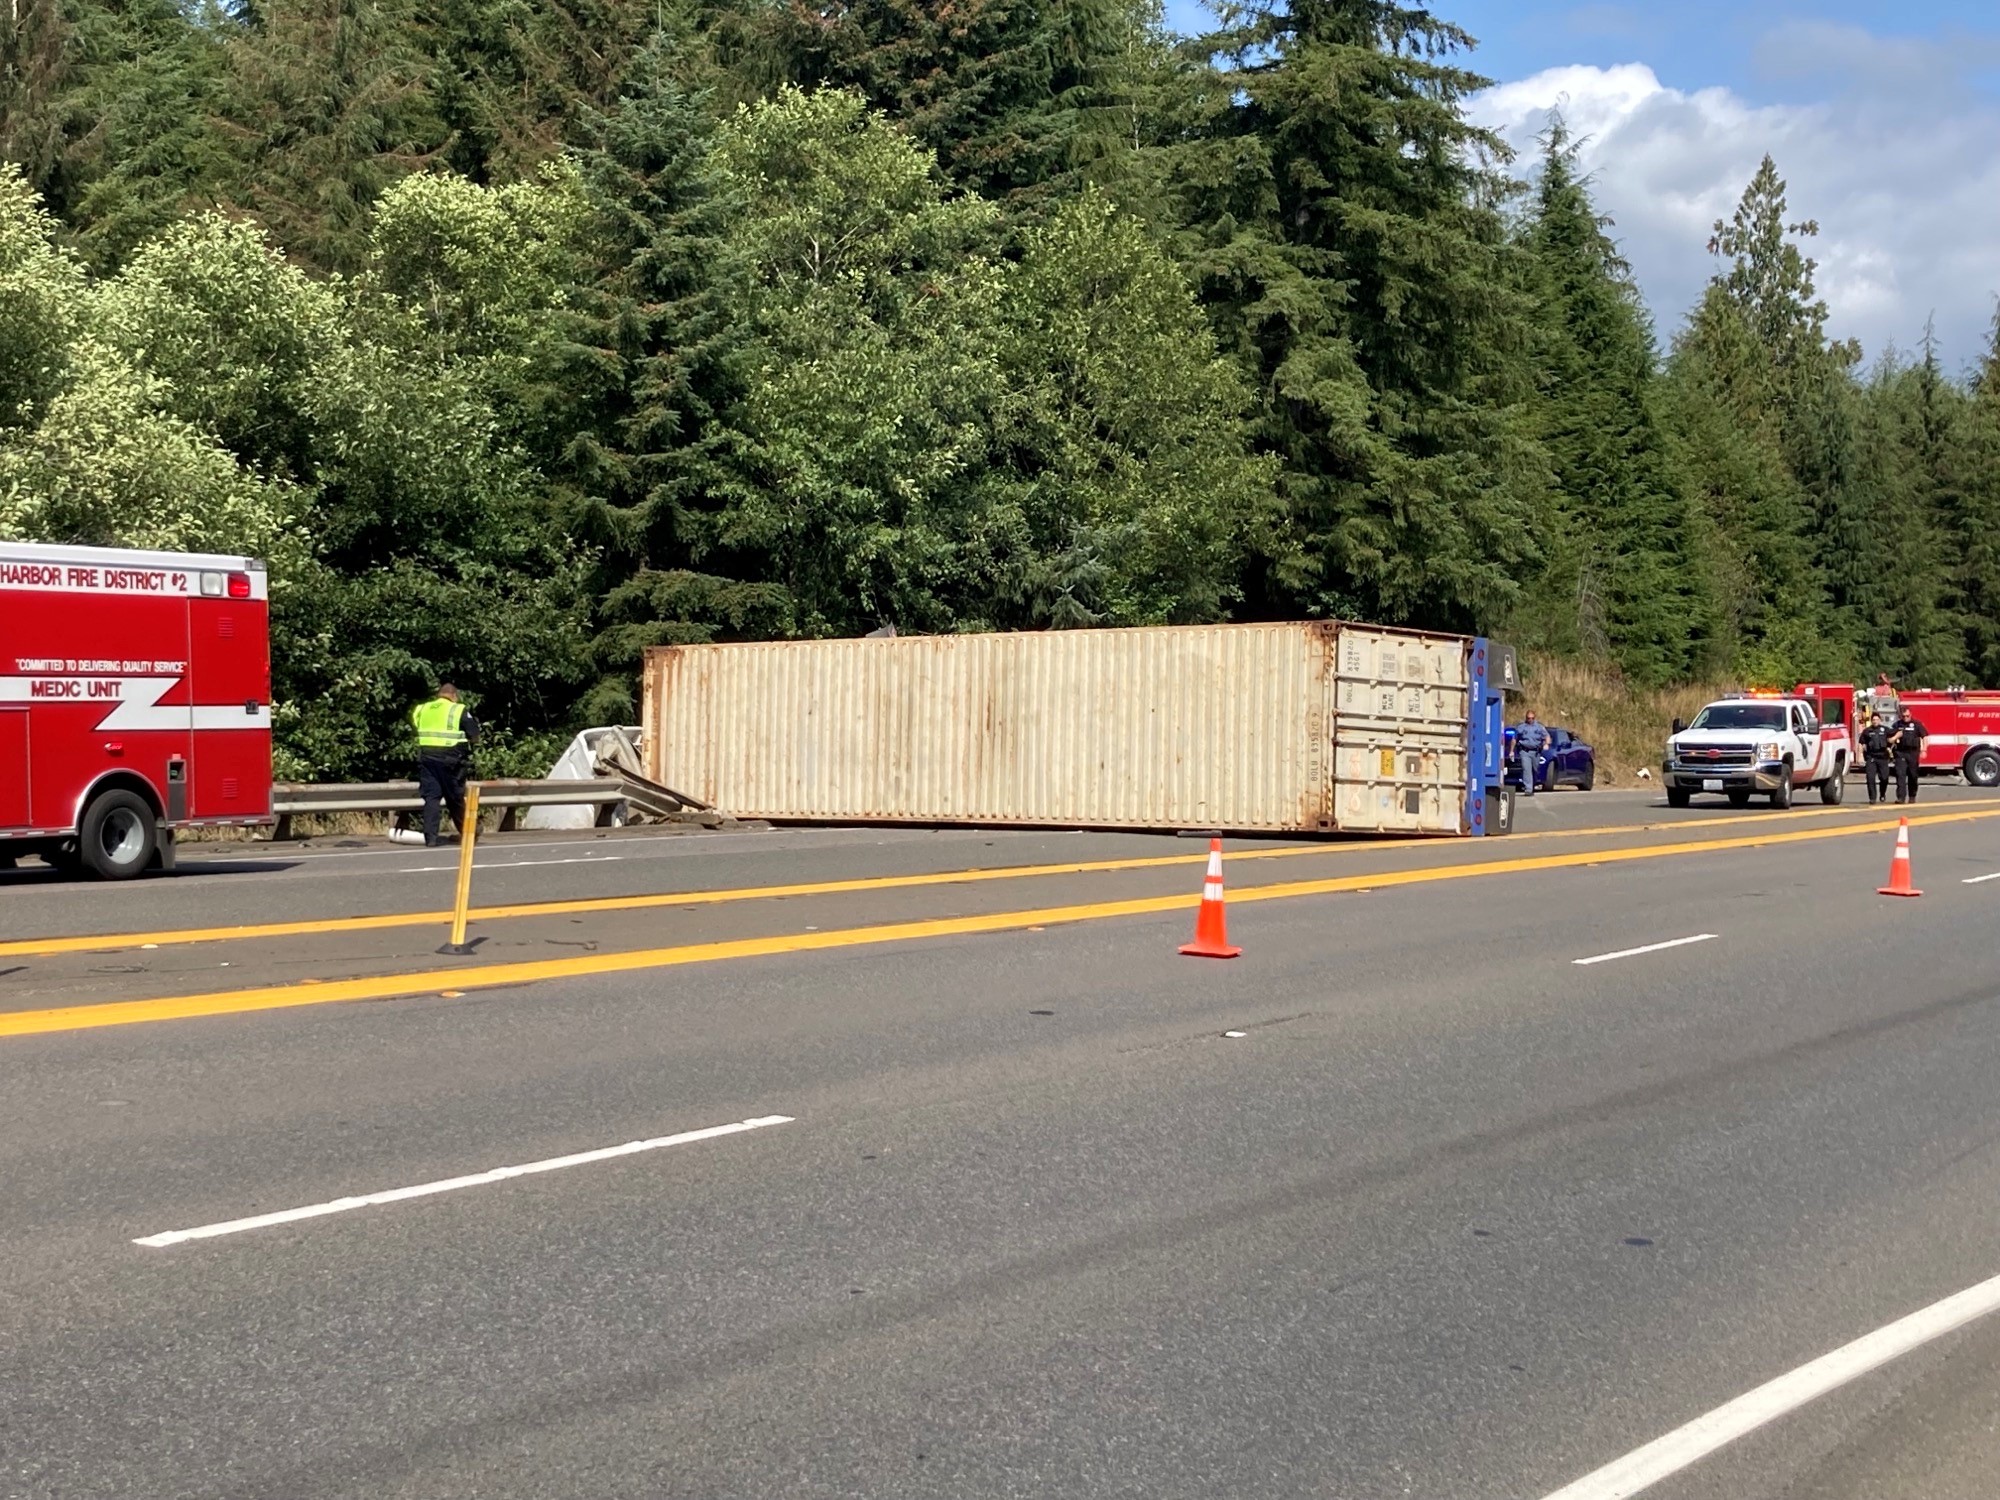 First responders are on scene westbound US 12 approaching Aberdeen at milepost 6.4. All westbound lanes are blocked. This may take a while to reopen. https://t.co/CacFAHPsTi